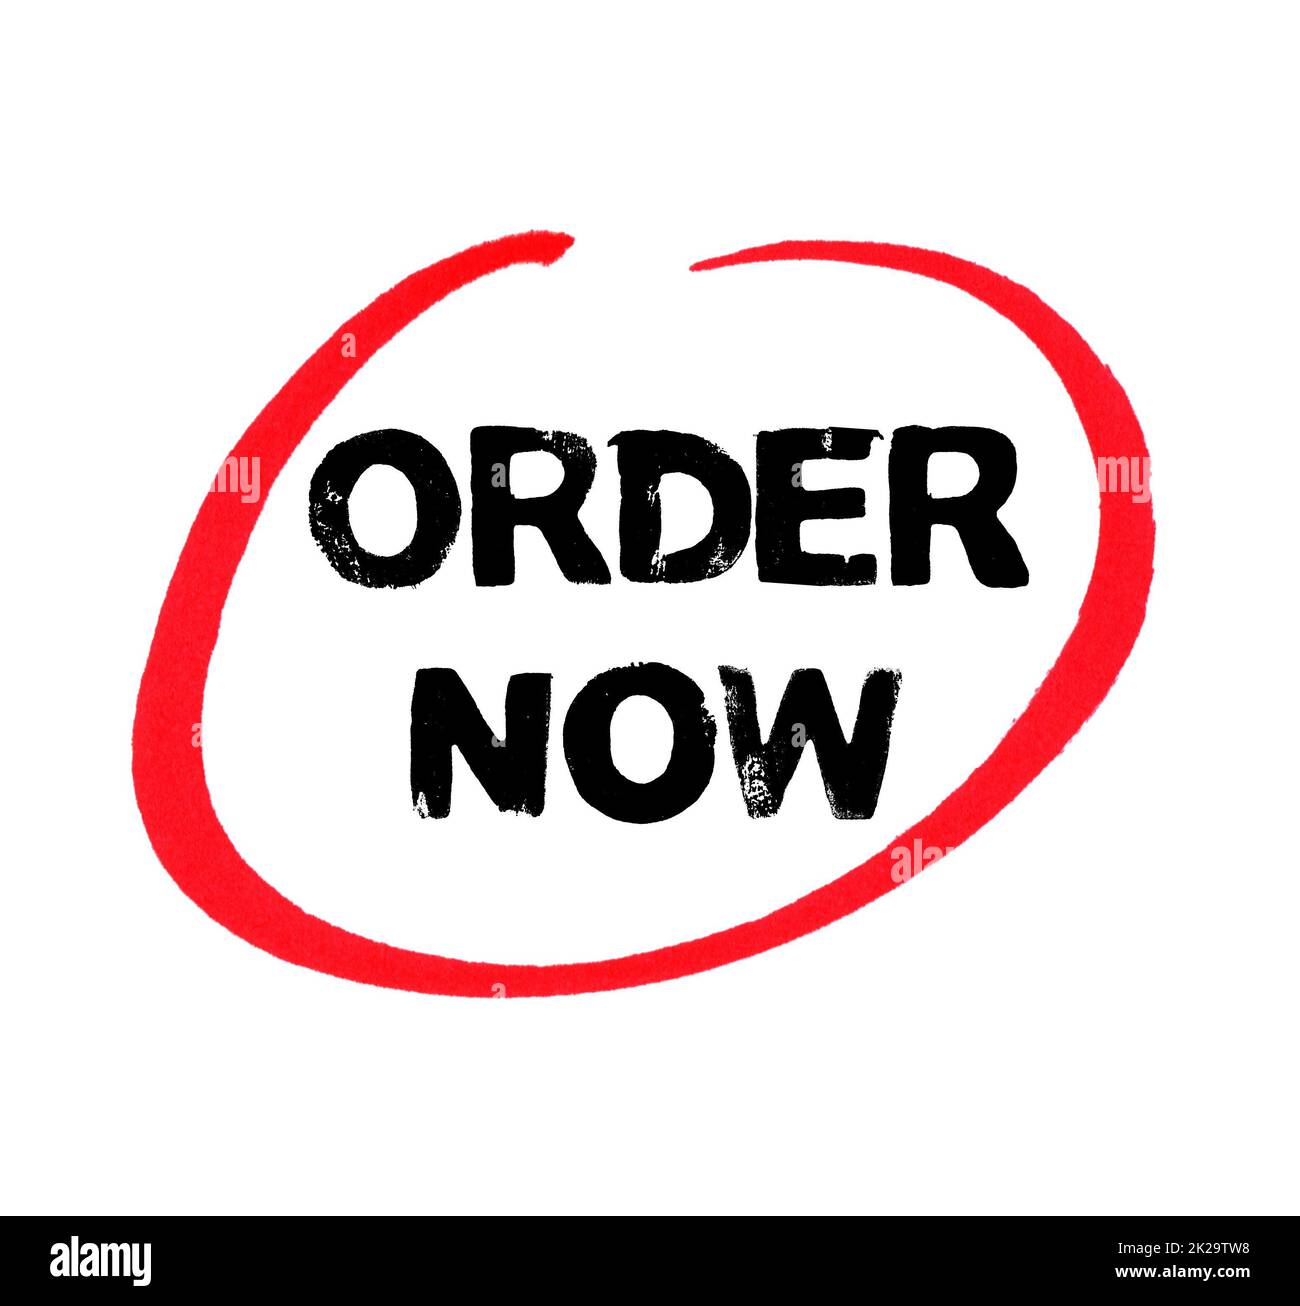 Order now with red pencil circle Stock Photo